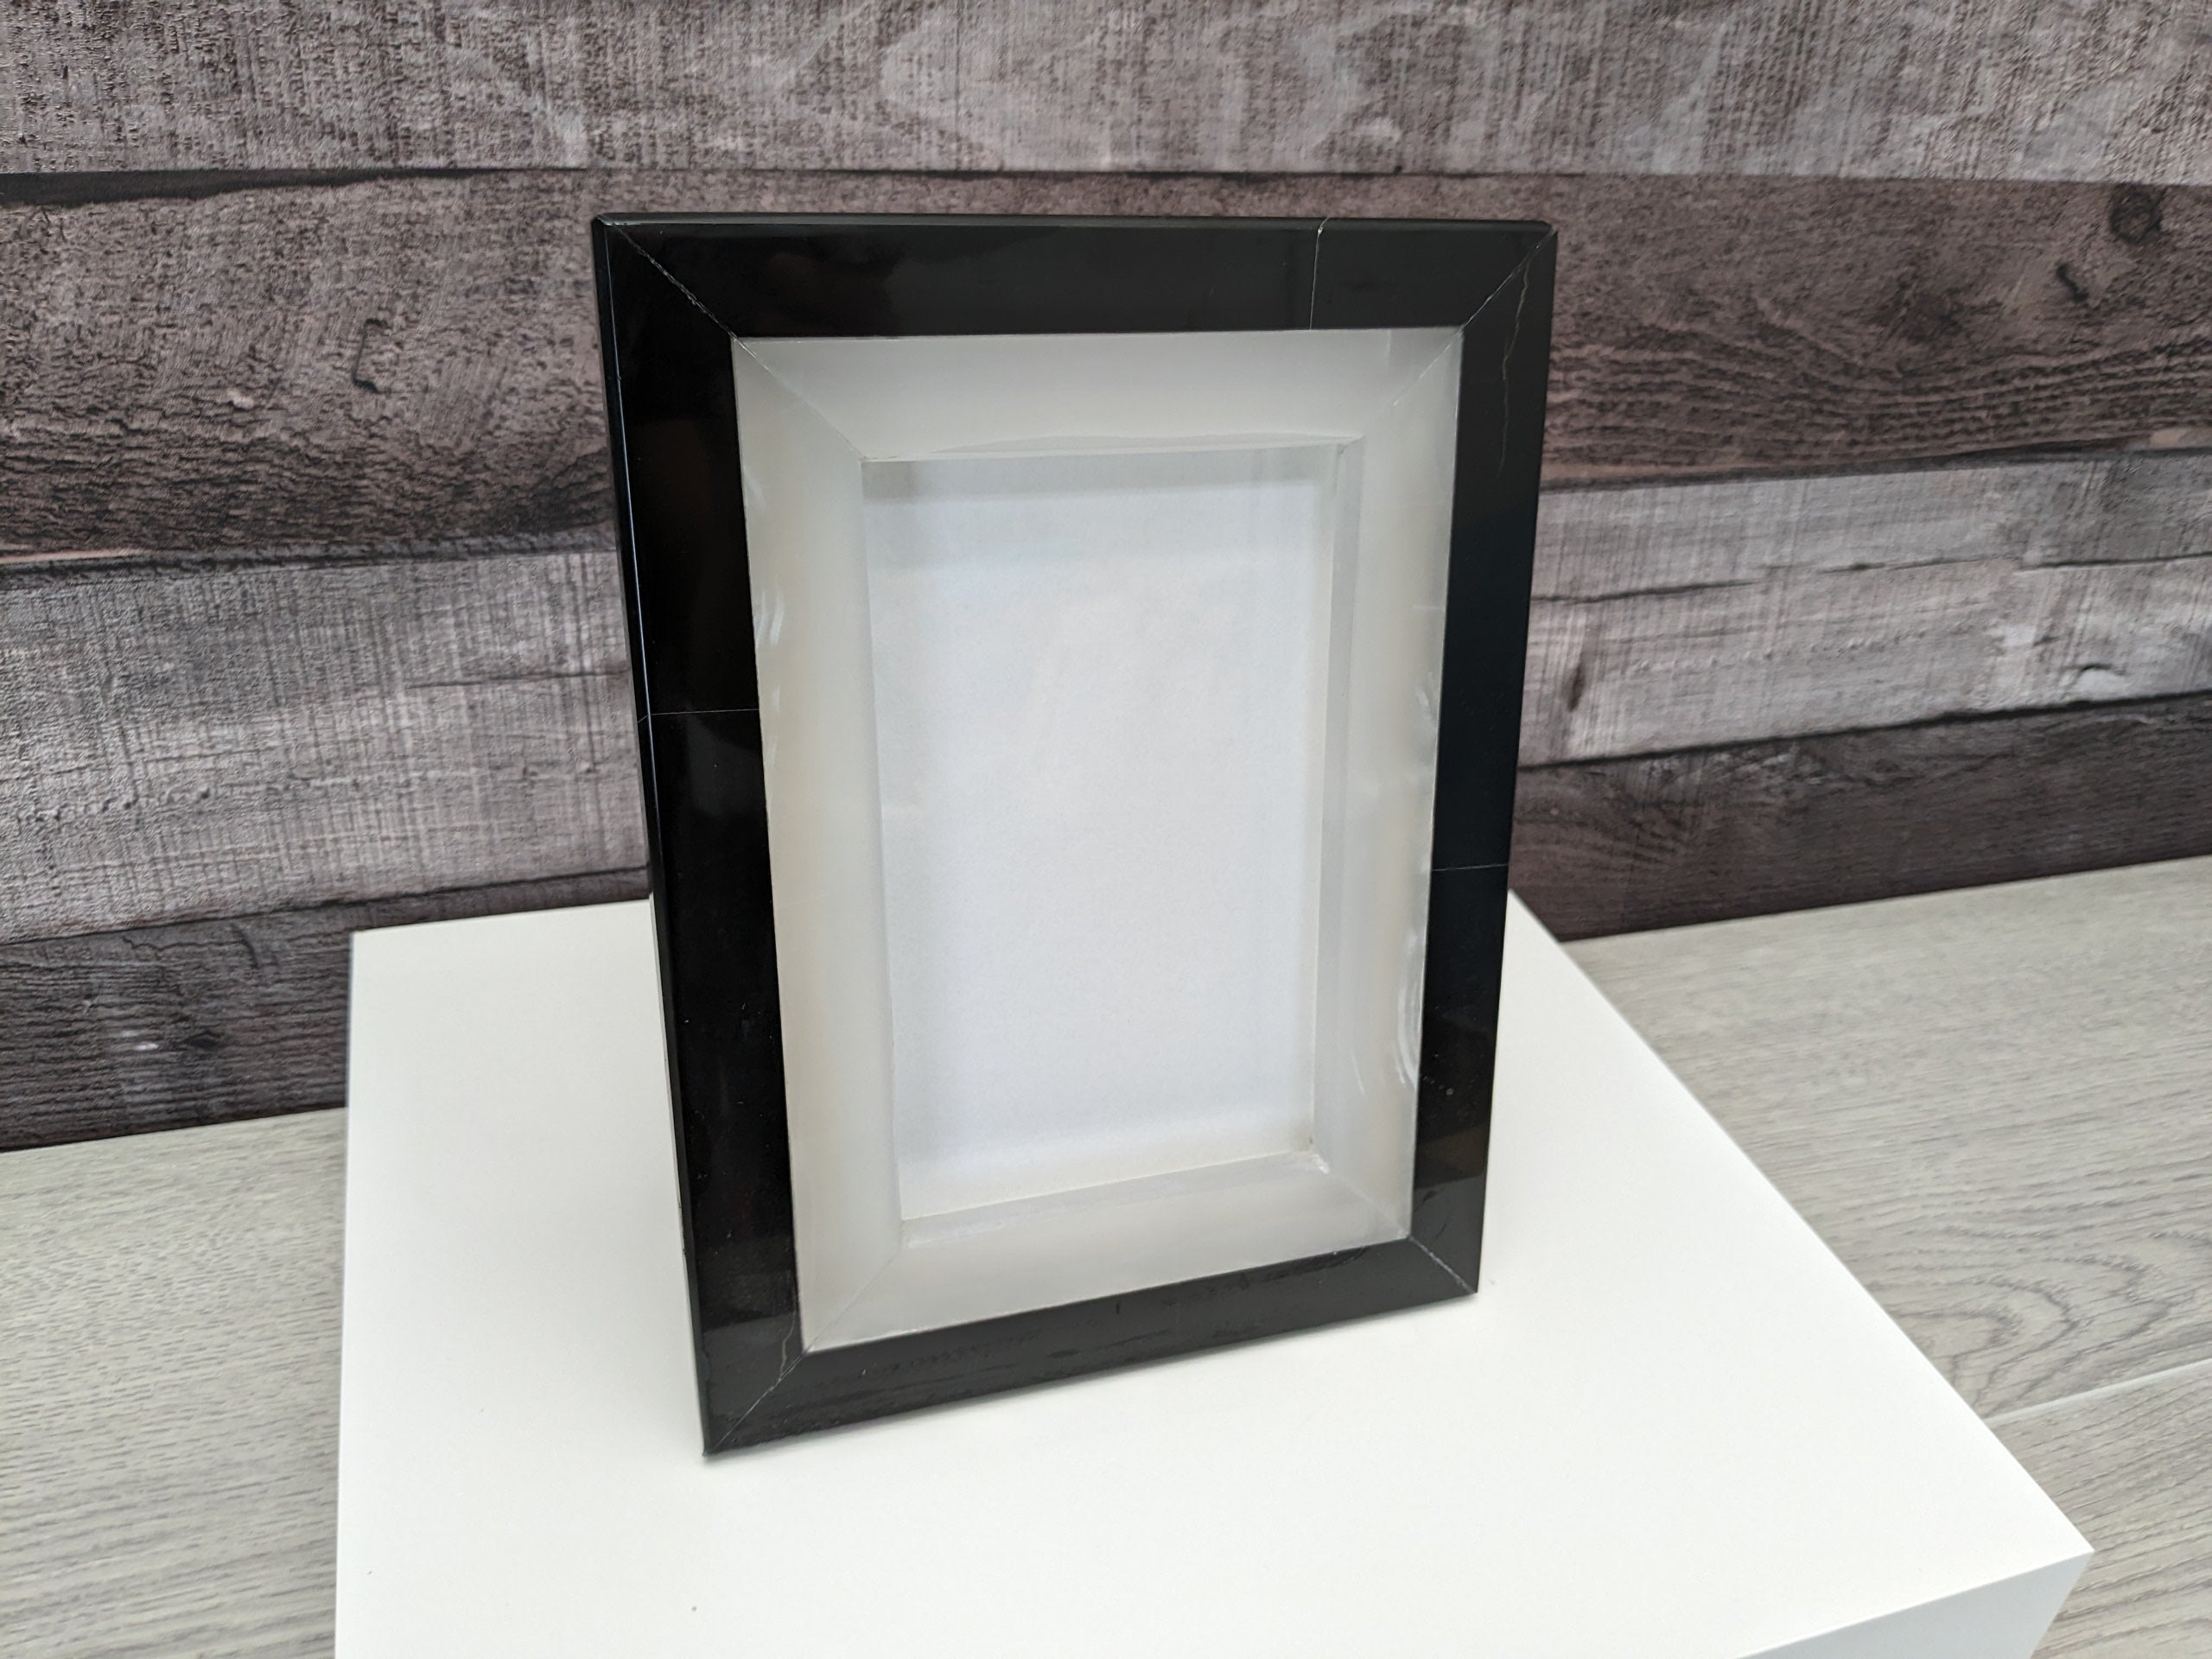 Black and Beige Onyx Stone Frame with Glass Cover. Handmade in Mexico. We package and ship from the USA. Buy now at www.felipeandgrace.com.